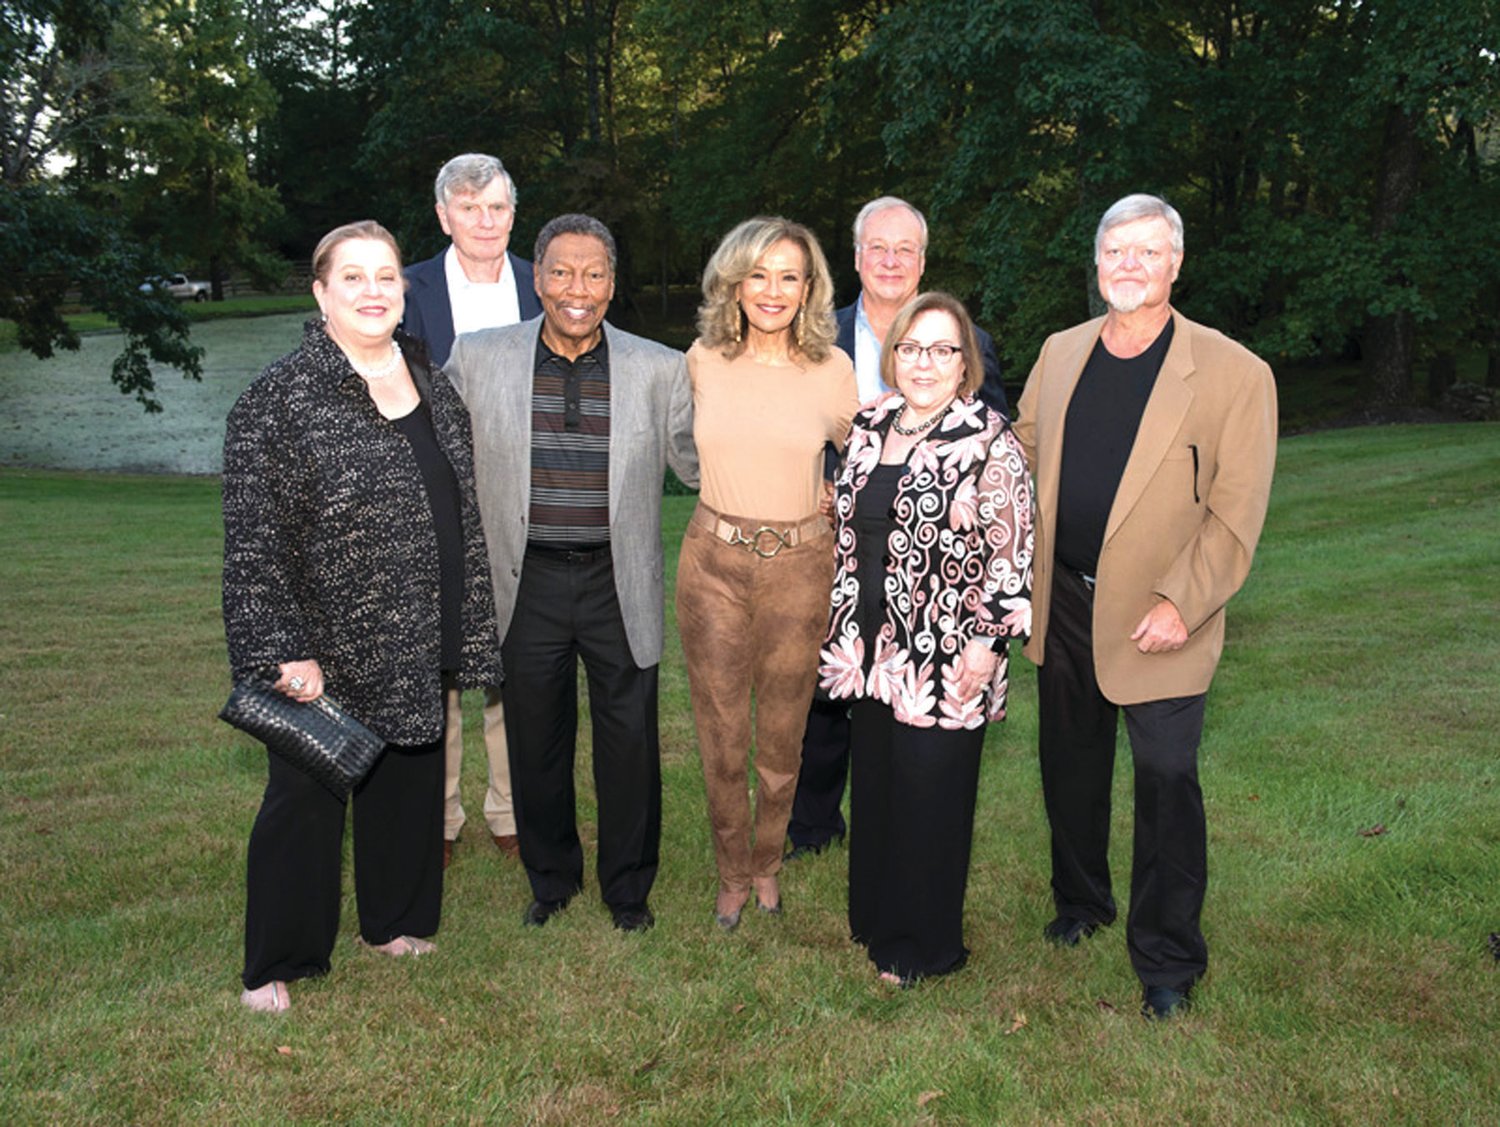 Christine and Robert Reilly, Billy Davis Jr., Marilyn McCoo, Fred Demler and event Co-Chairs Vivian Banta and Robert Field.